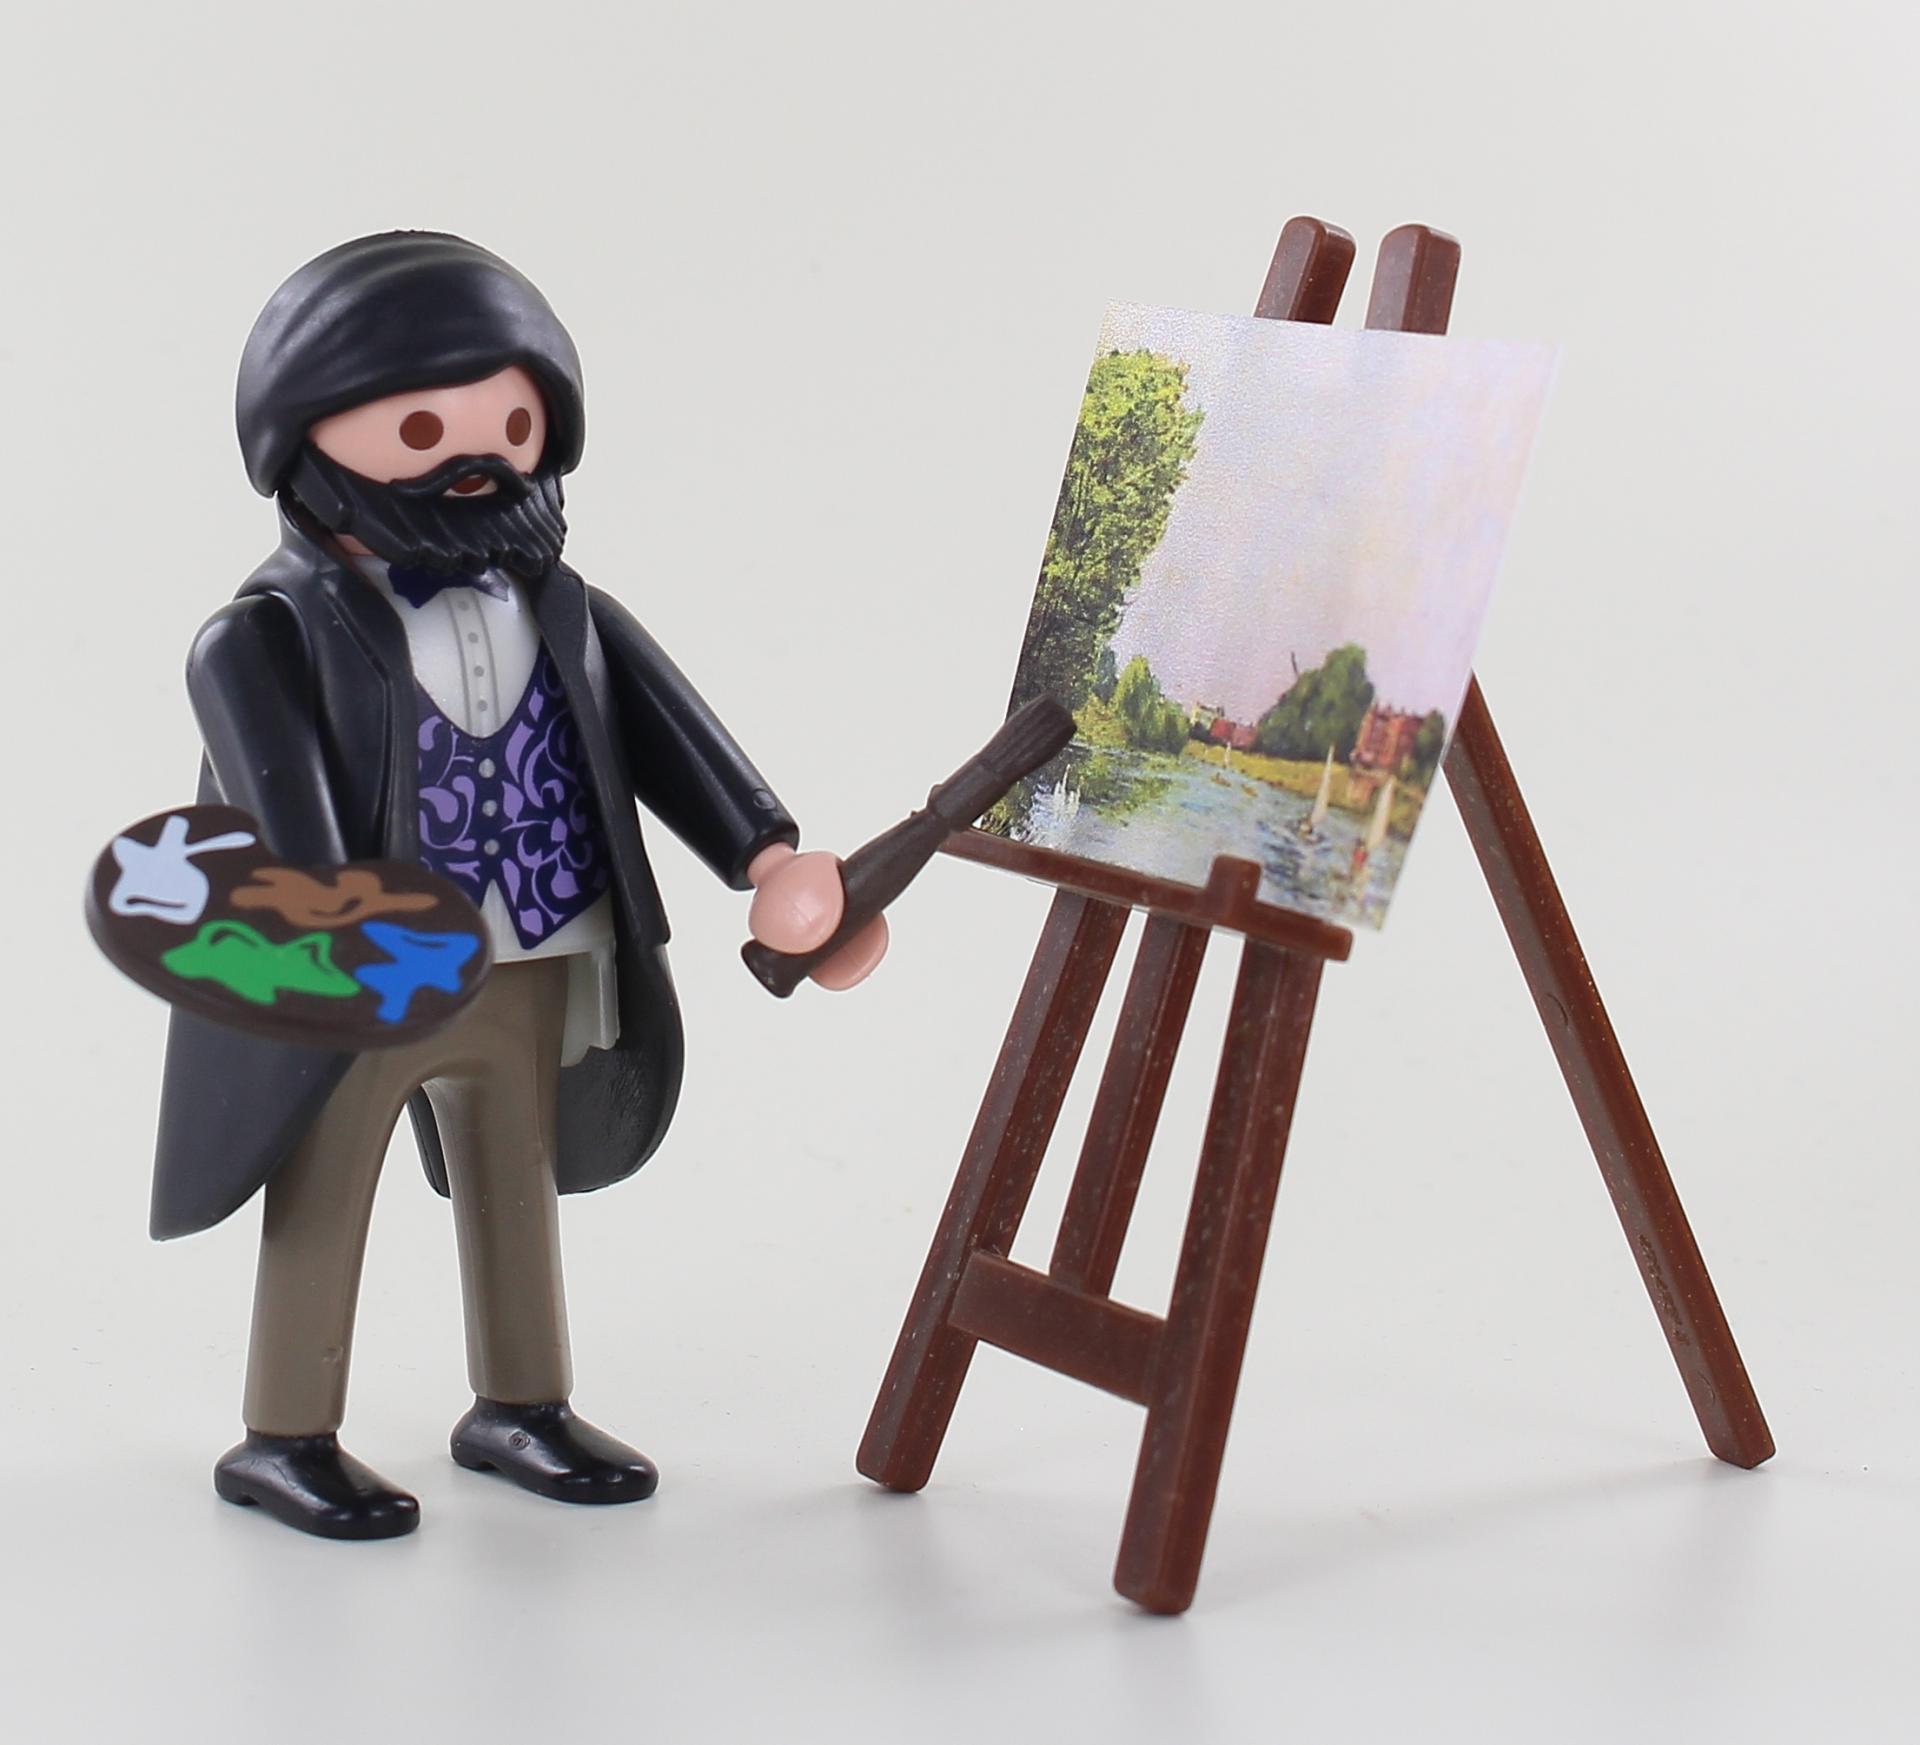 Playmobil alfred sisley dominique bethune 1